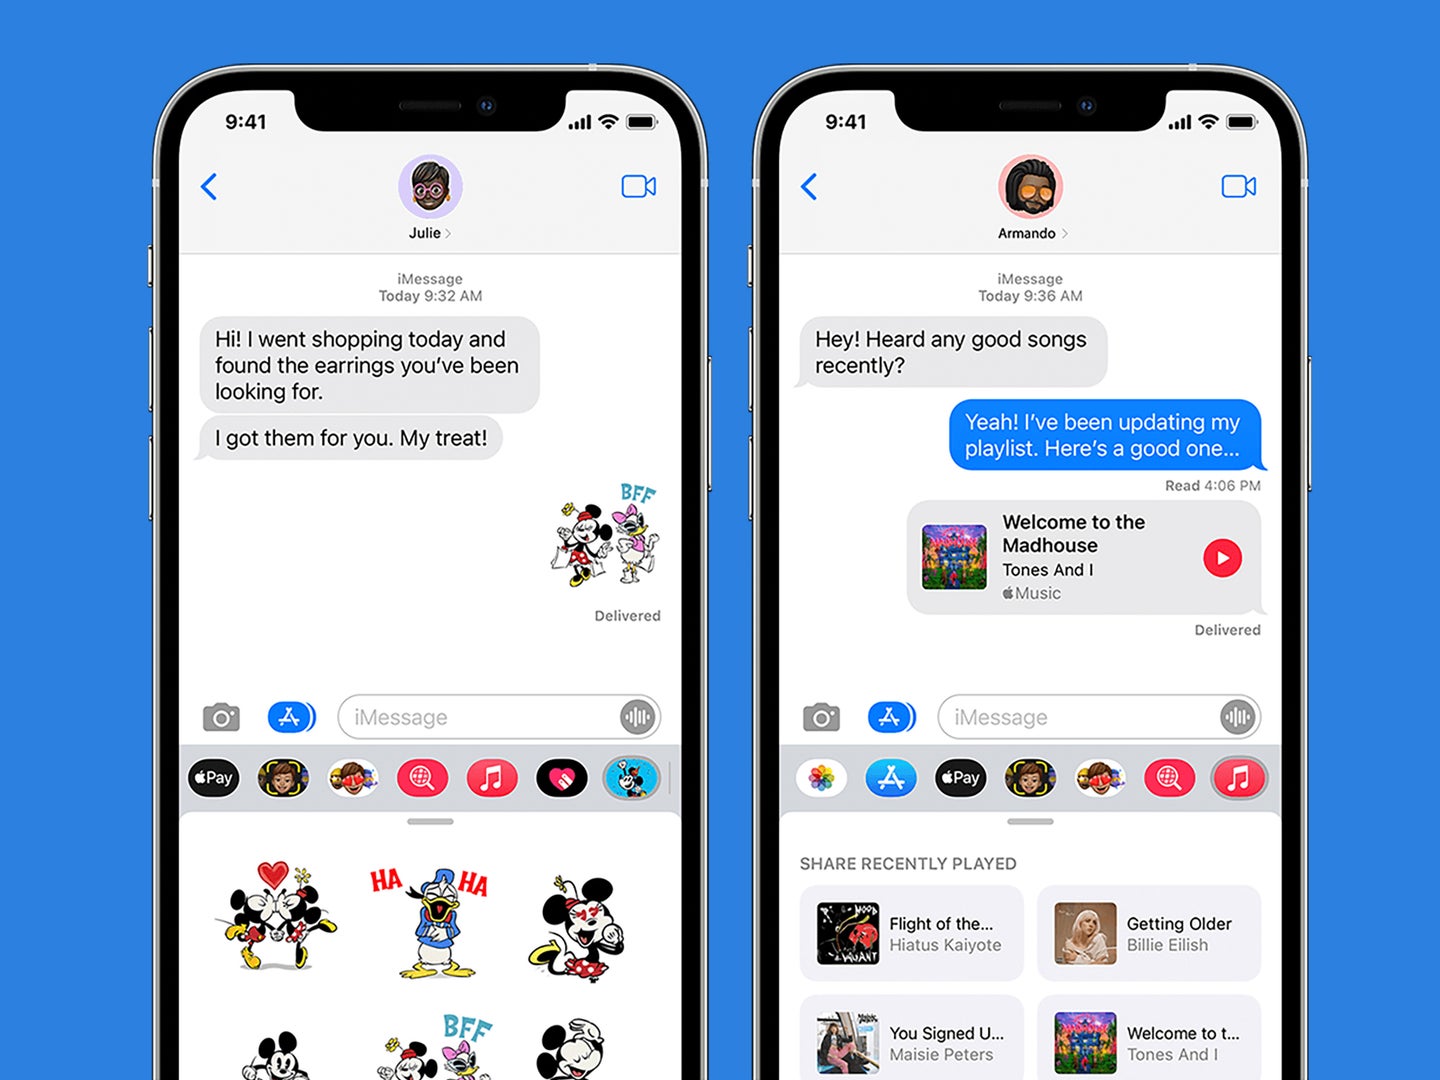 Apple's iMessage messaging system within the iPhone Messages app, showing off some mini apps you can add to your conversations.